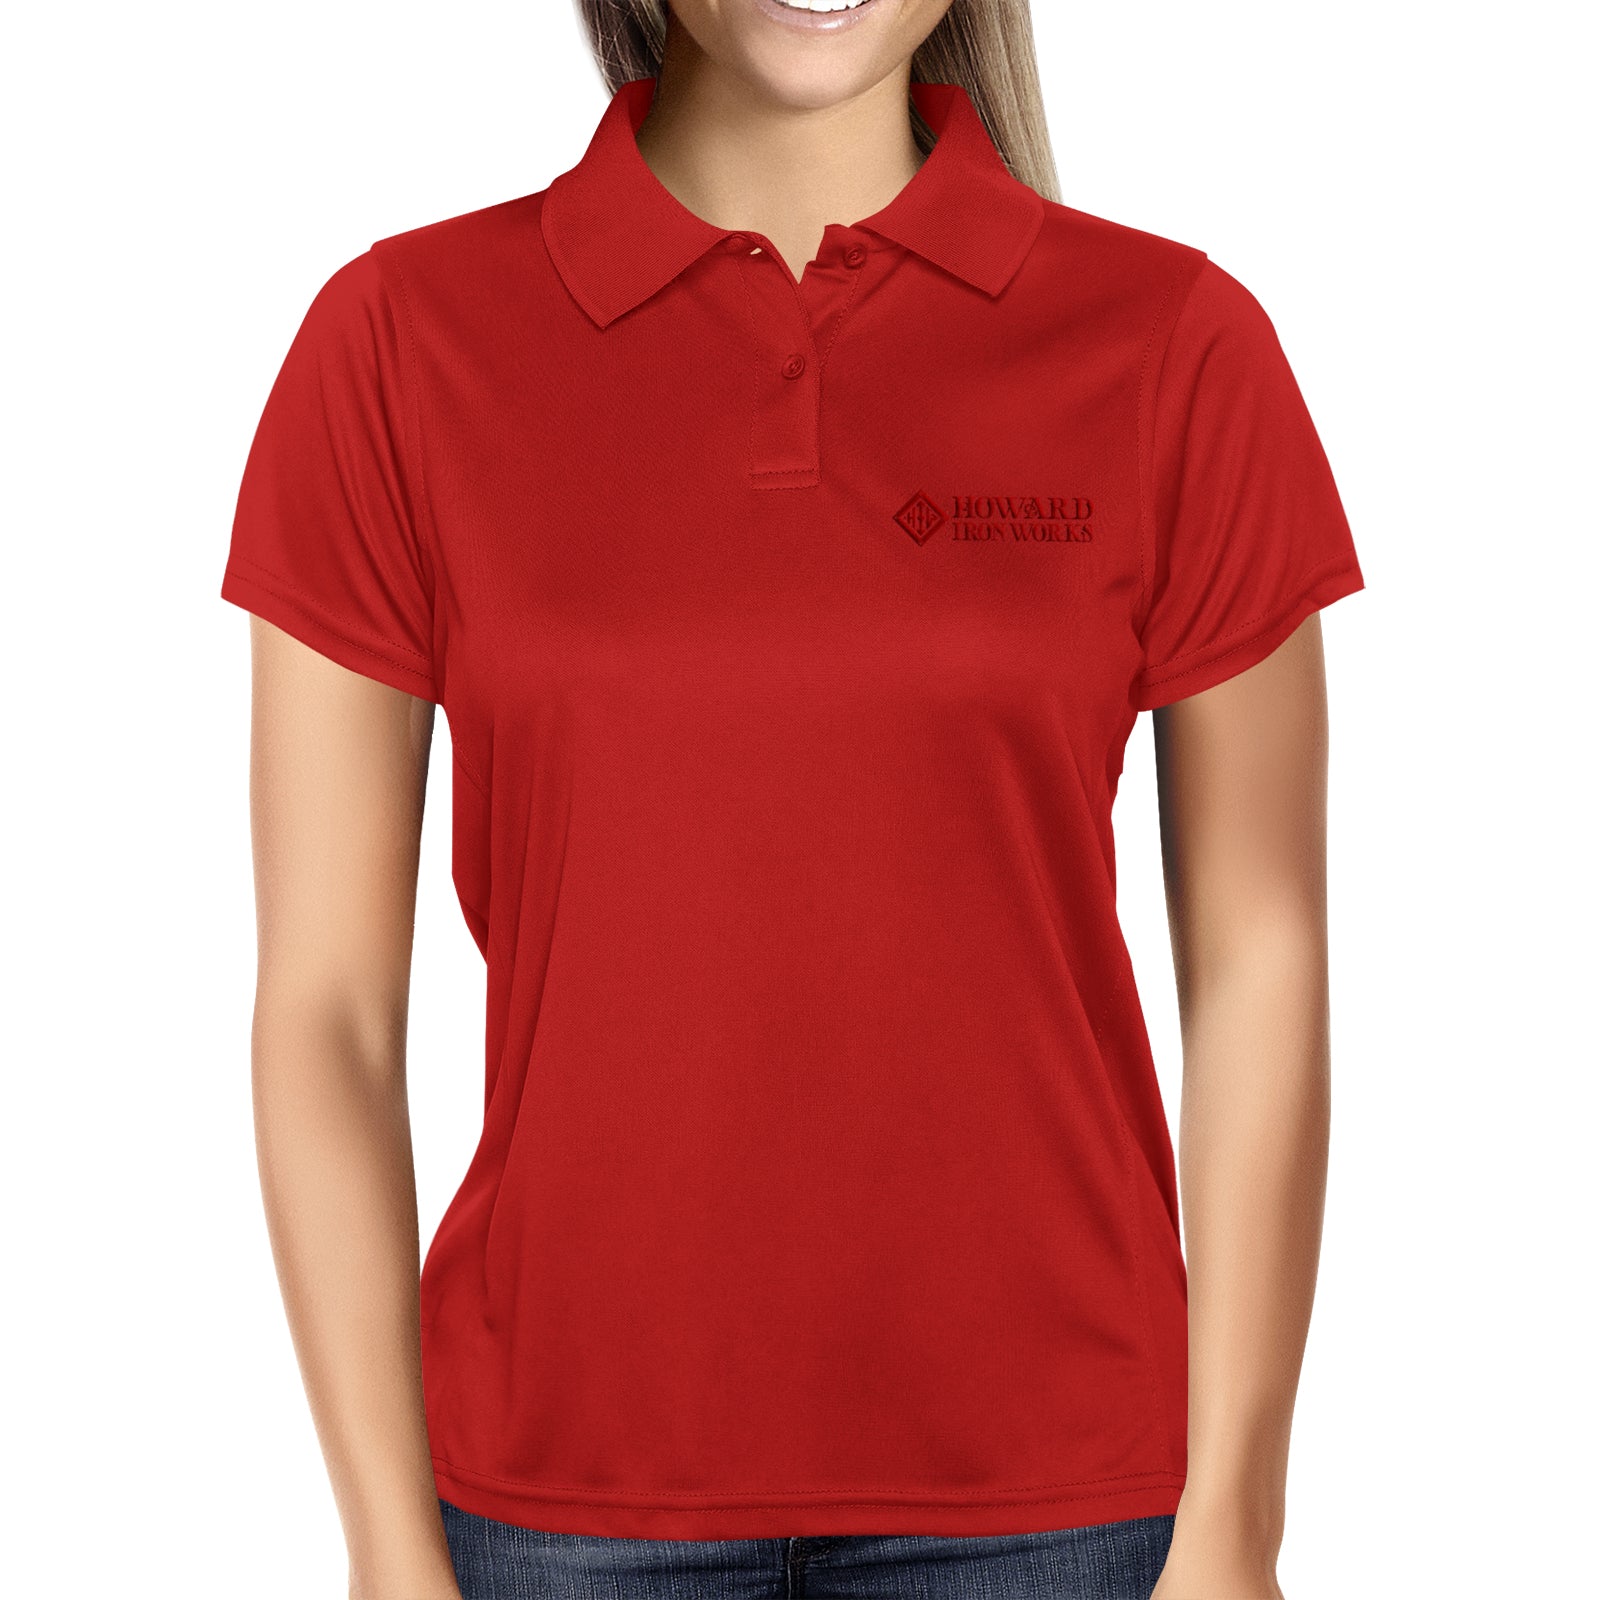 Ladies Polo Shirt, Short Sleeve, Red - from Howard Iron Works Printing Museum